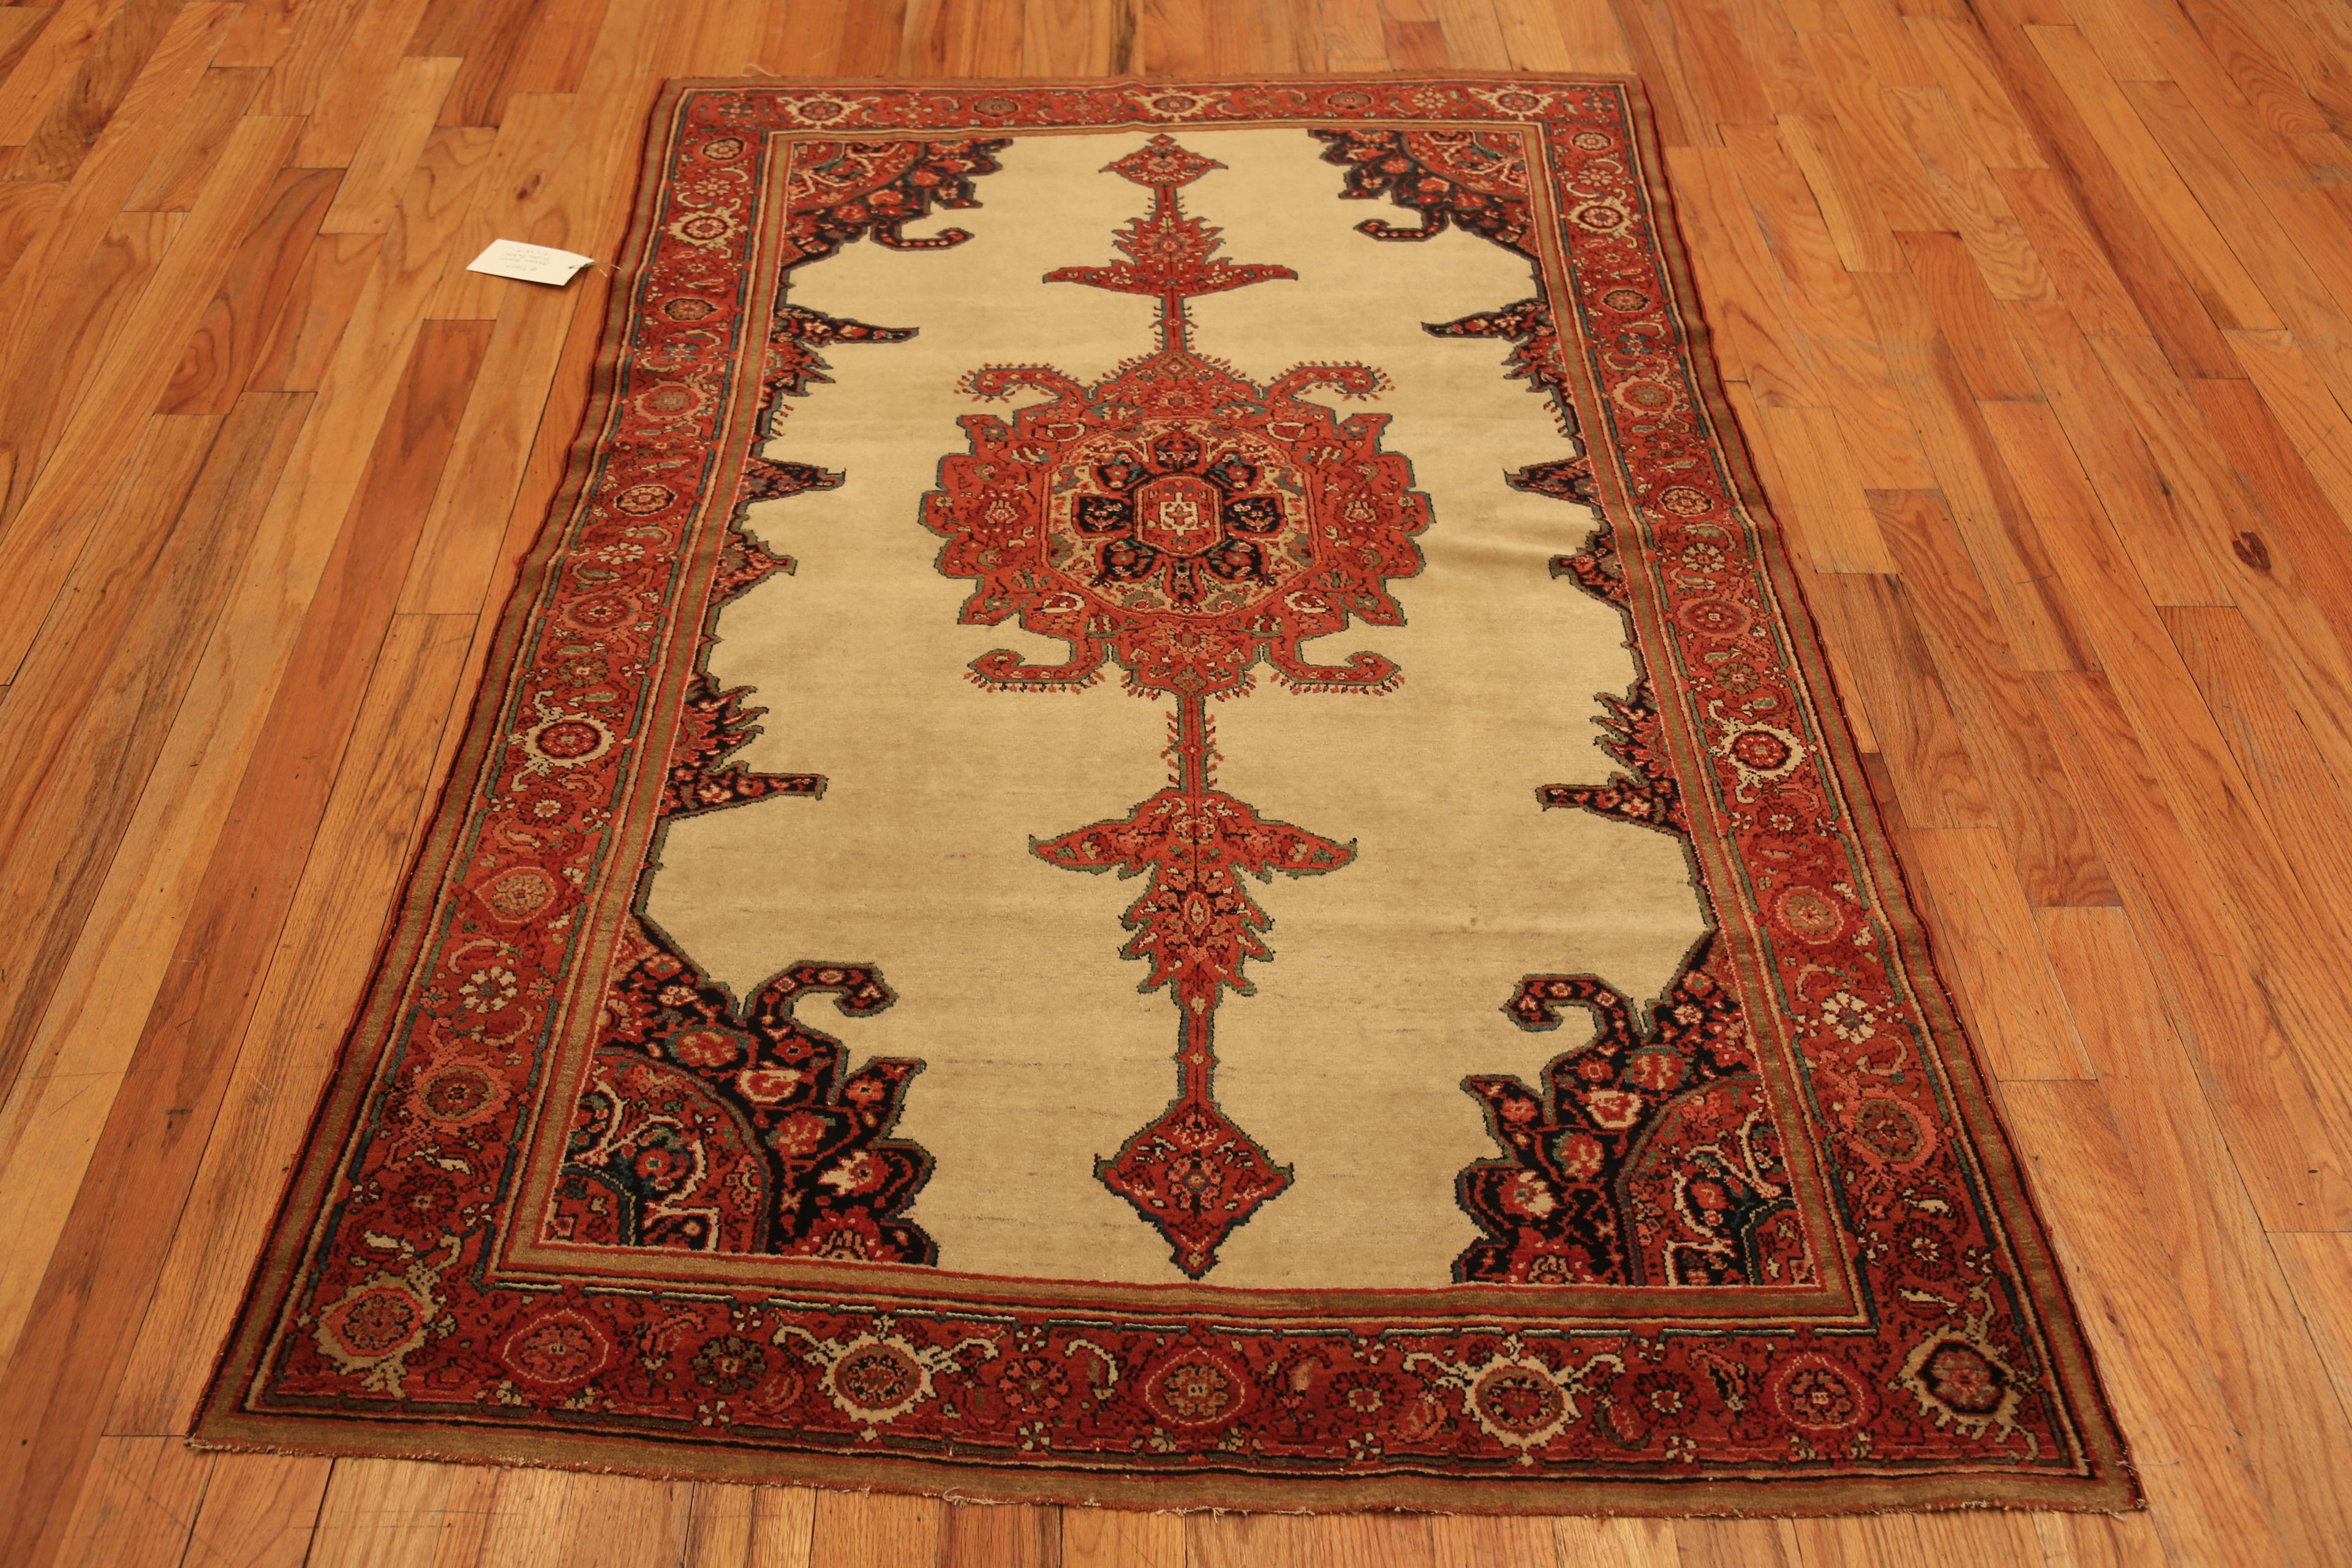 Antique Persian Mishan Malayer Rug, Country of origin: Persia, Circa date: 1880. Size: 4 ft 2 in x 6 ft 4 in (1.27 m x 1.93 m)